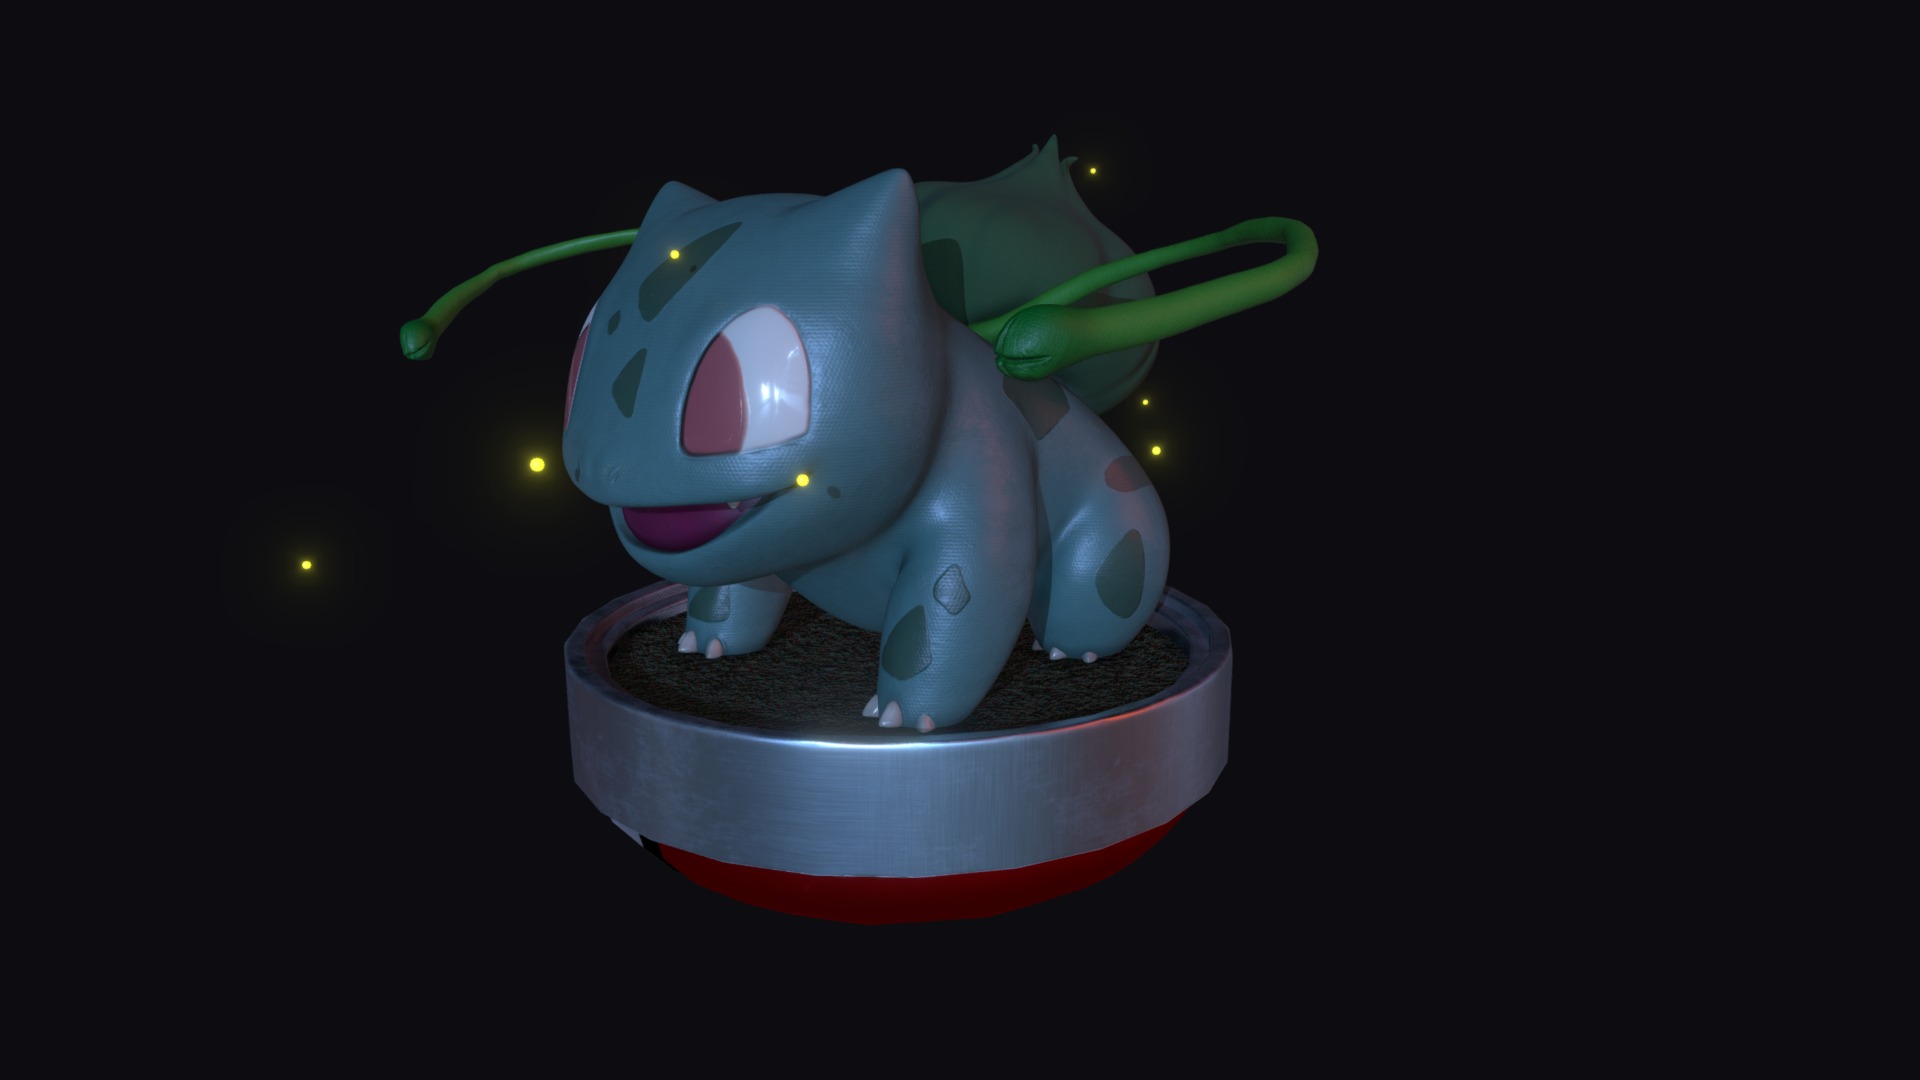 3D model Bulbasaur. - This is a 3D model of the Bulbasaur.. The 3D model is about a small figurine of a cartoon character.